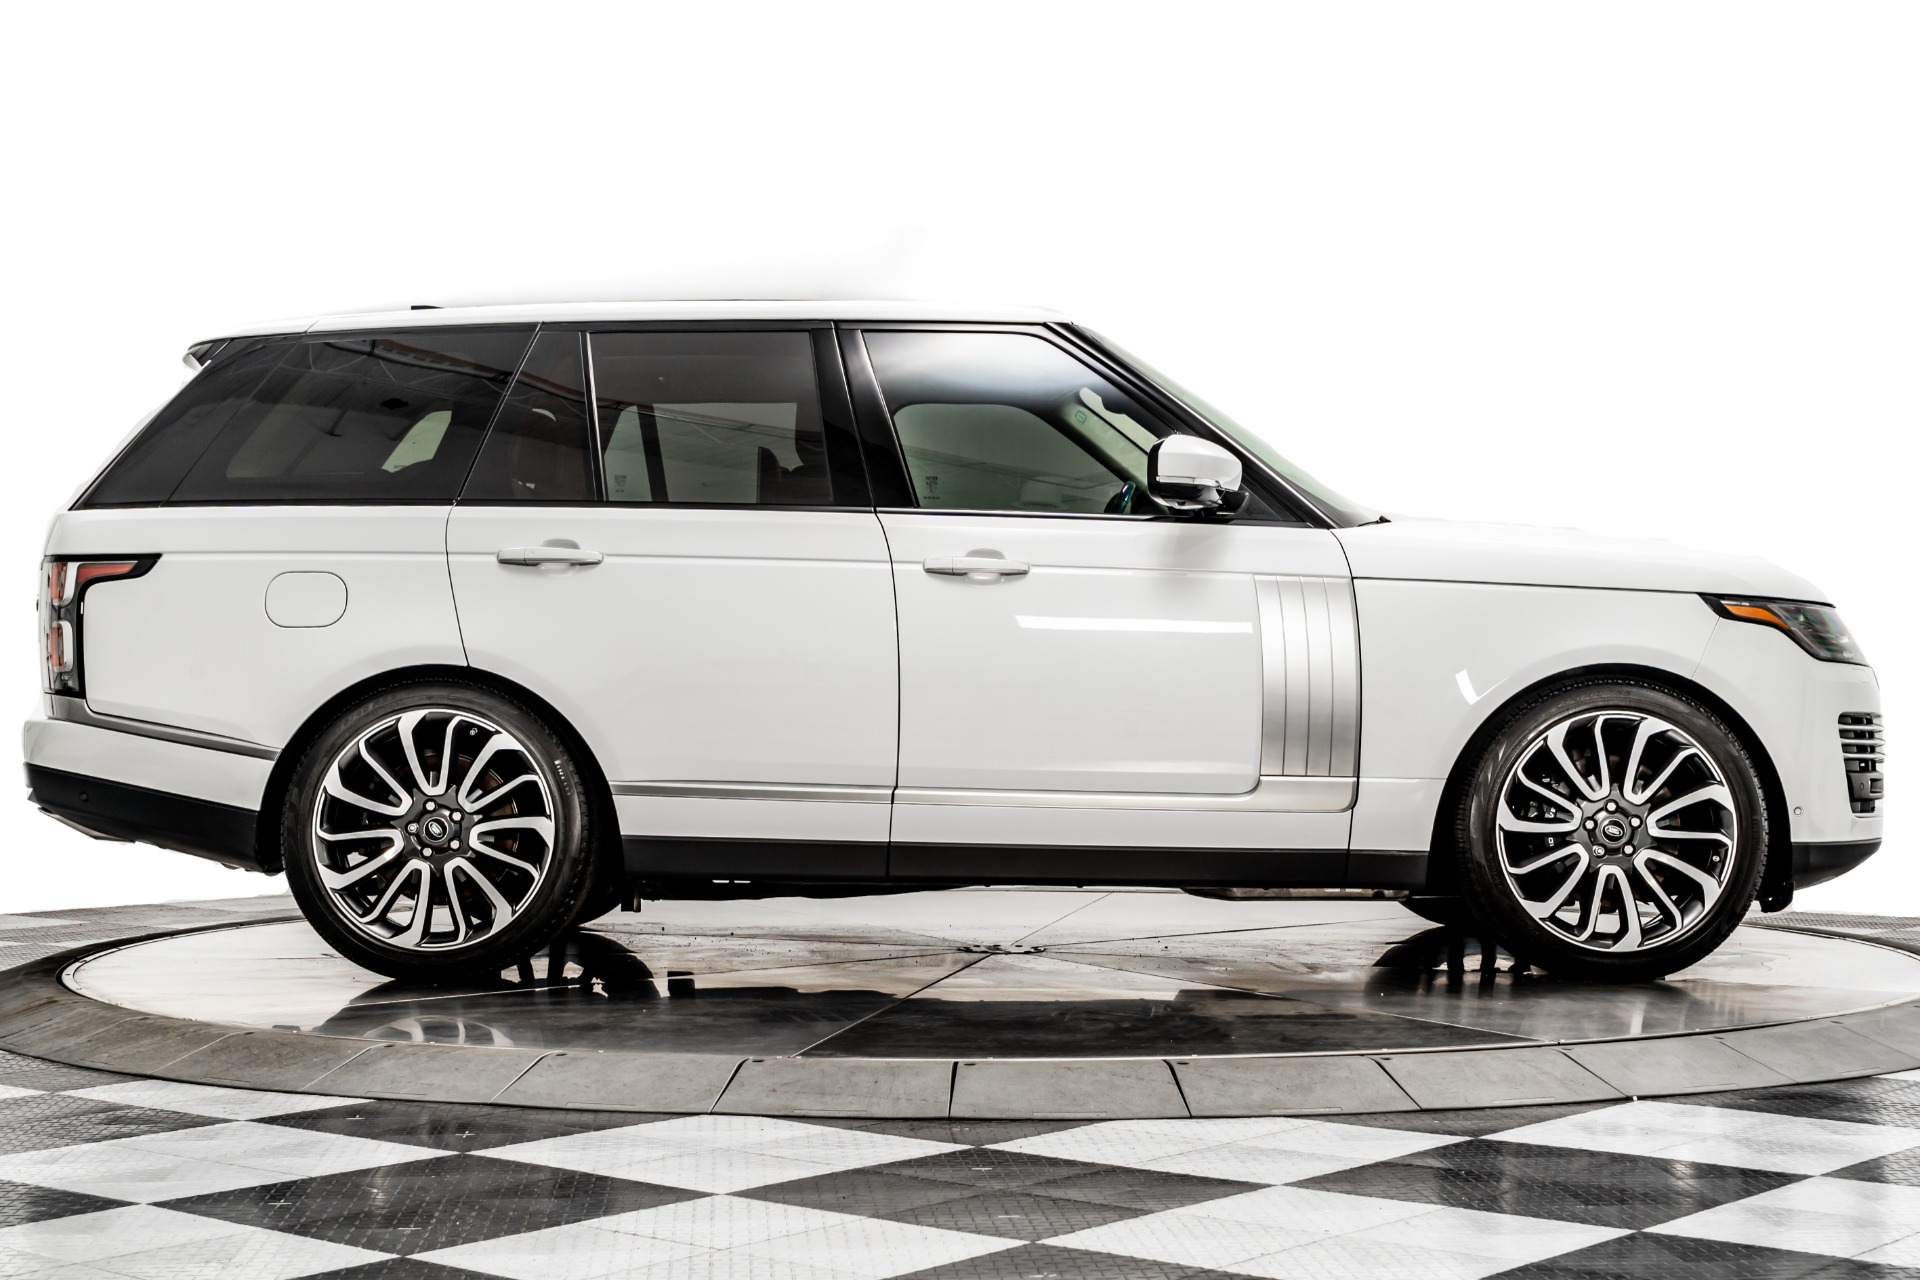 Used 2020 Land Rover Range Rover Autobiography For Sale ($114,900) |  Marshall Goldman Beverly Hills Stock #W23132